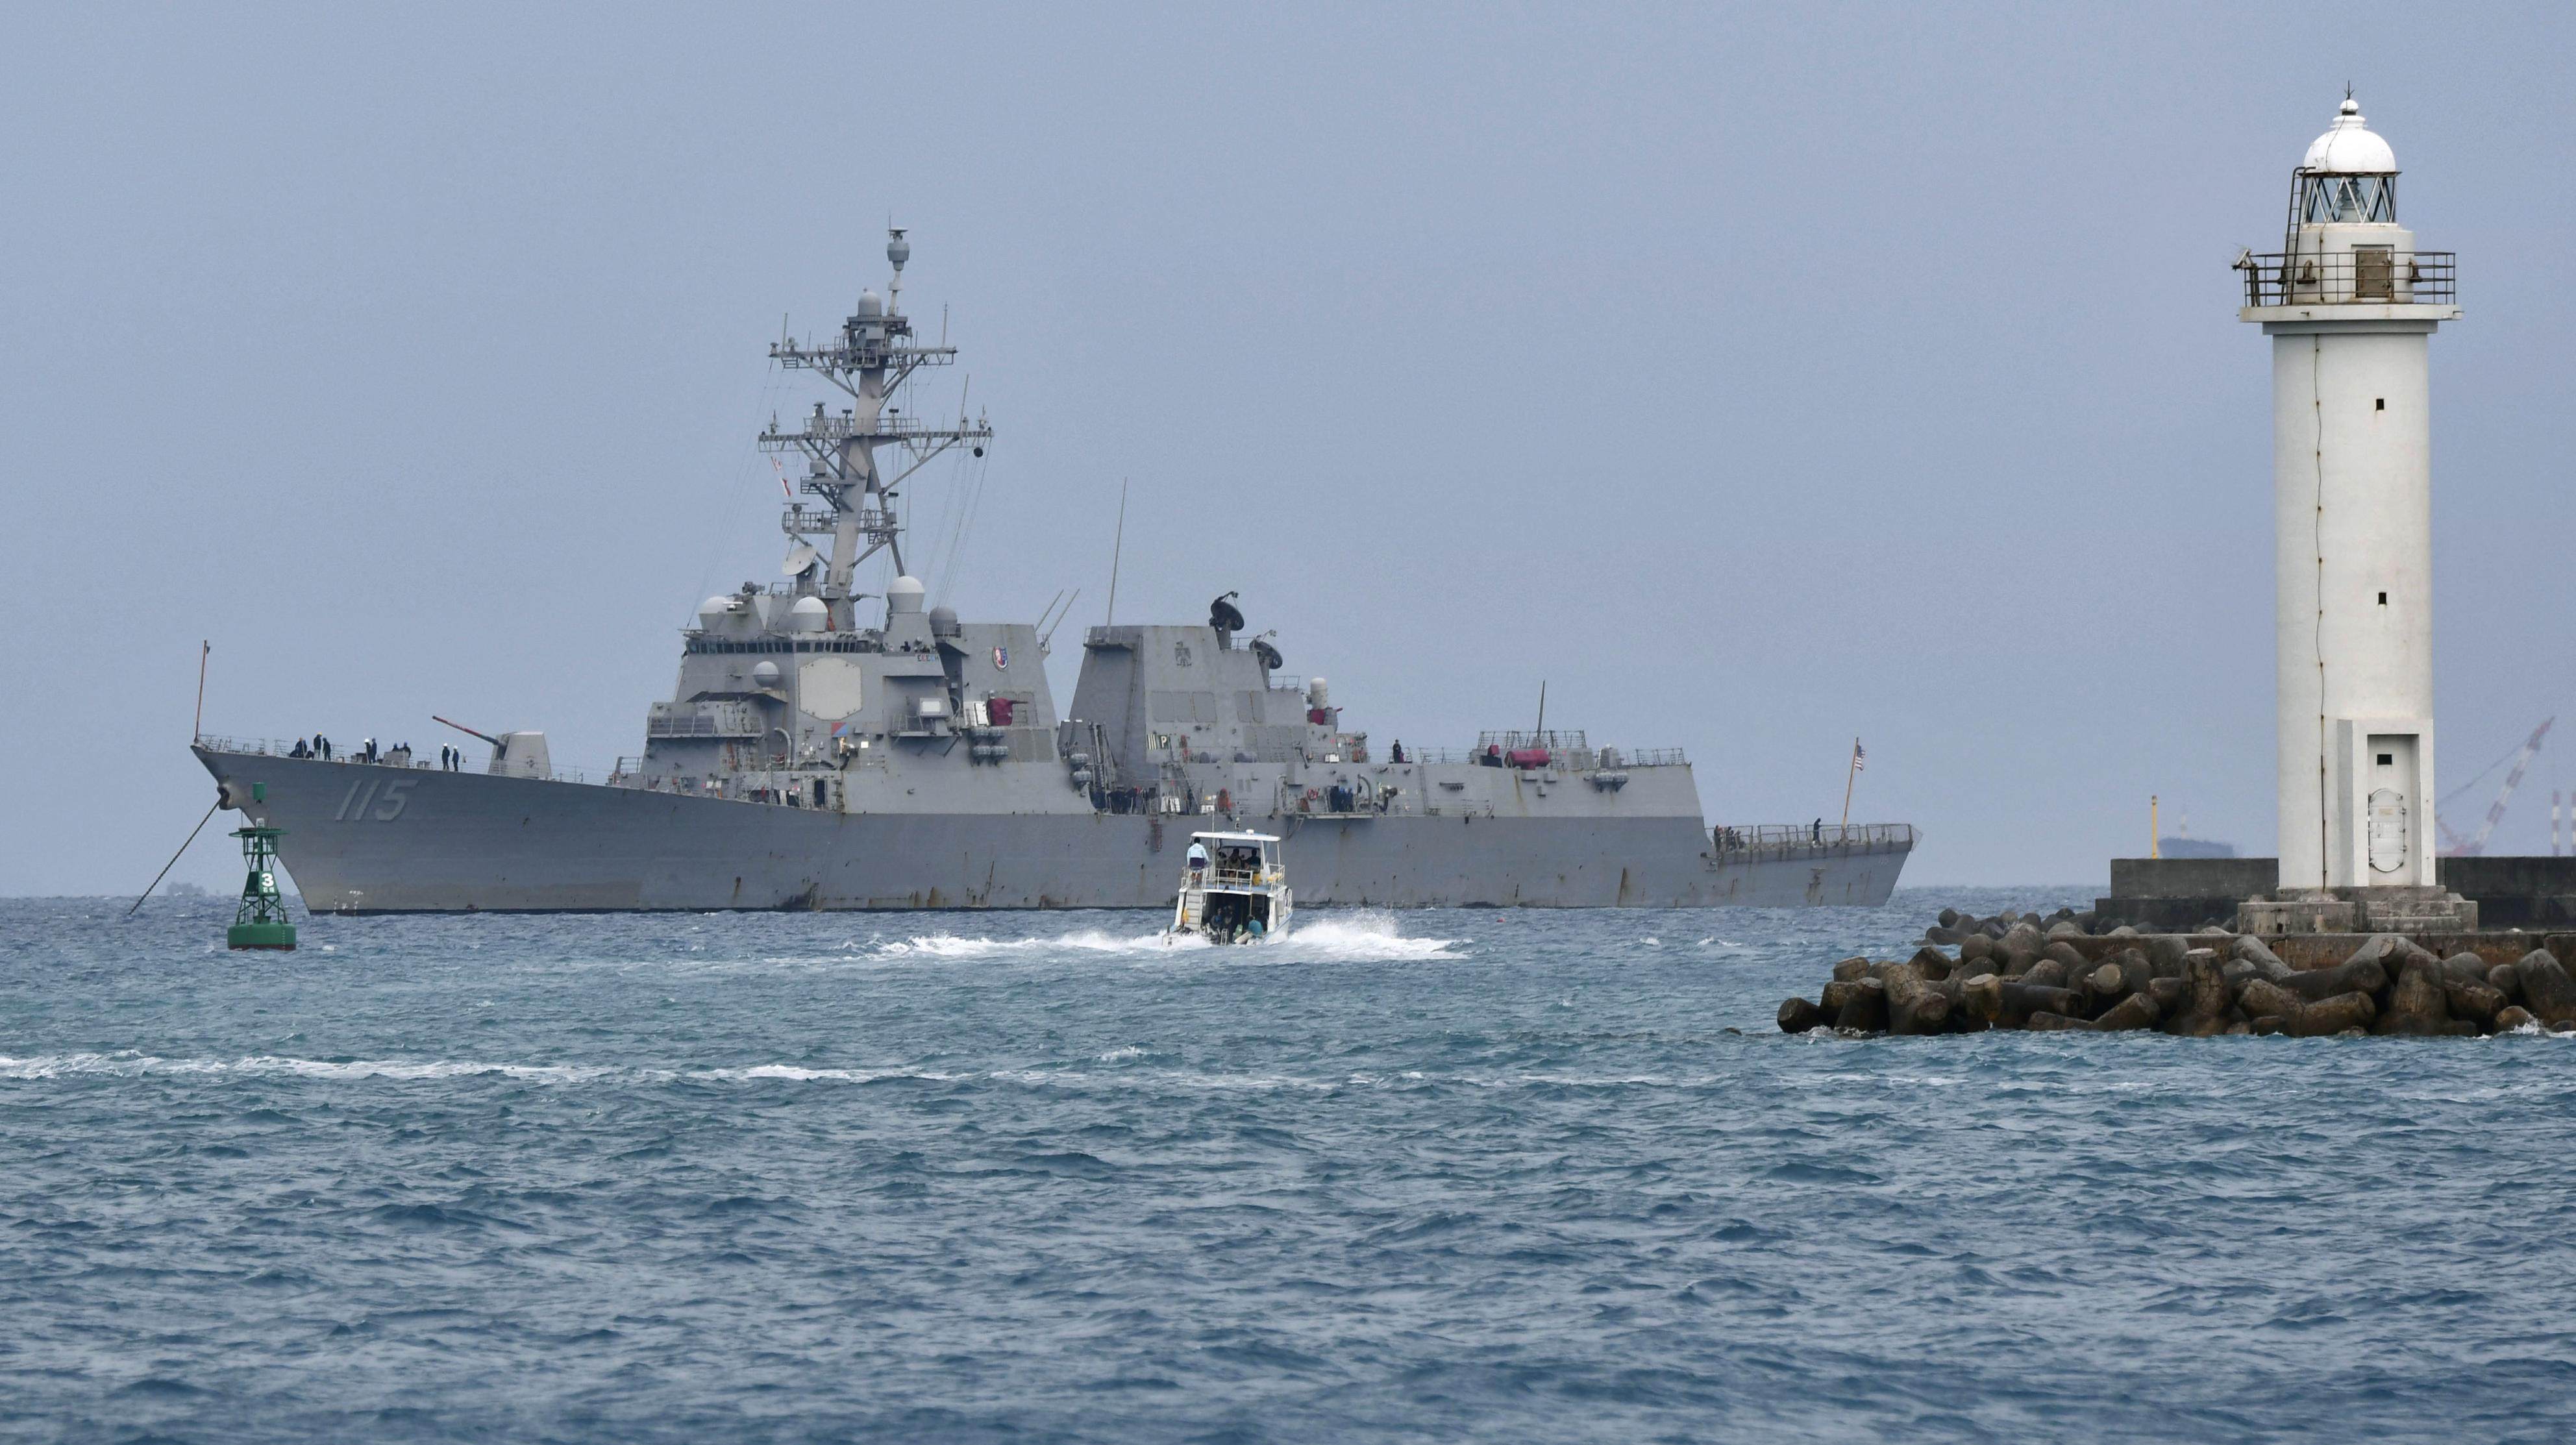 The US Navy destroyer Rafael Peralta makes a port call at Ishigaki Island in the southwestern Japan prefecture of Okinawa on March 11. Photo: Kyodo